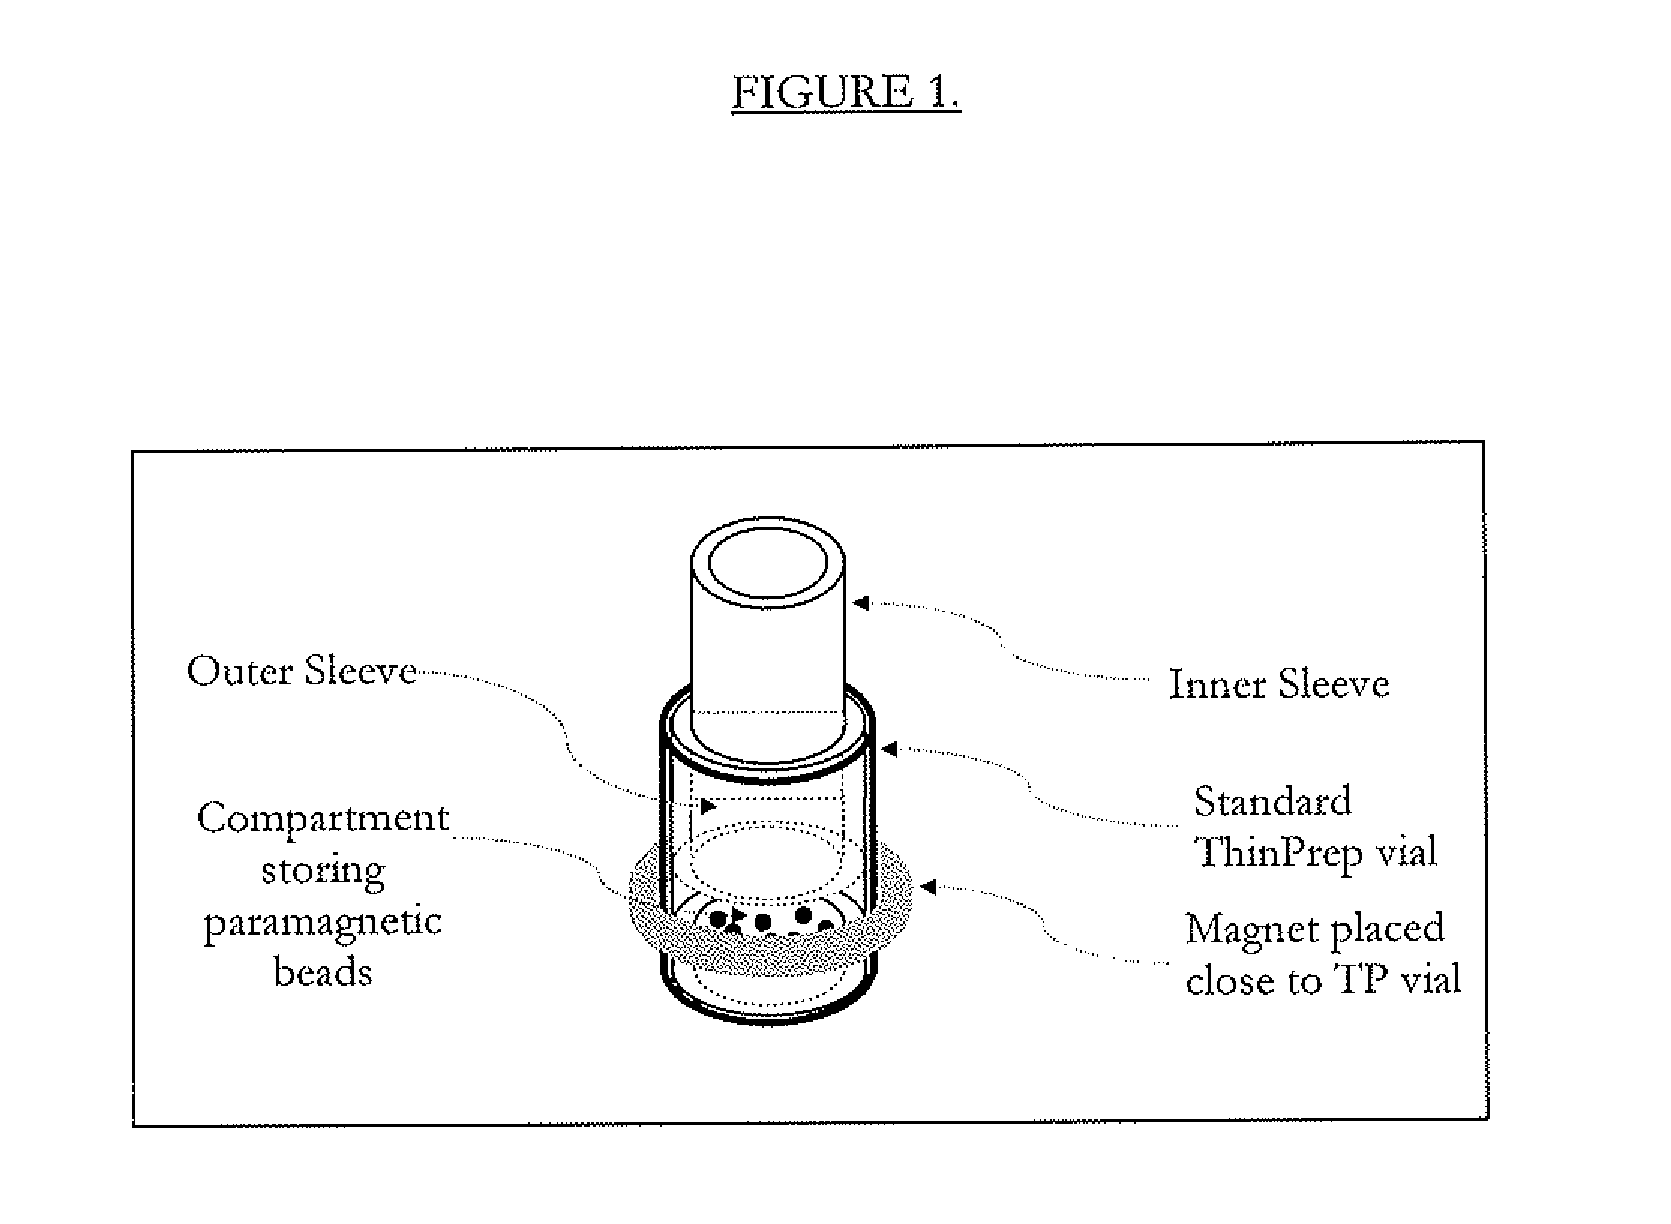 Method for Magnetic Separation of Red Blood cells from a Patient Sample